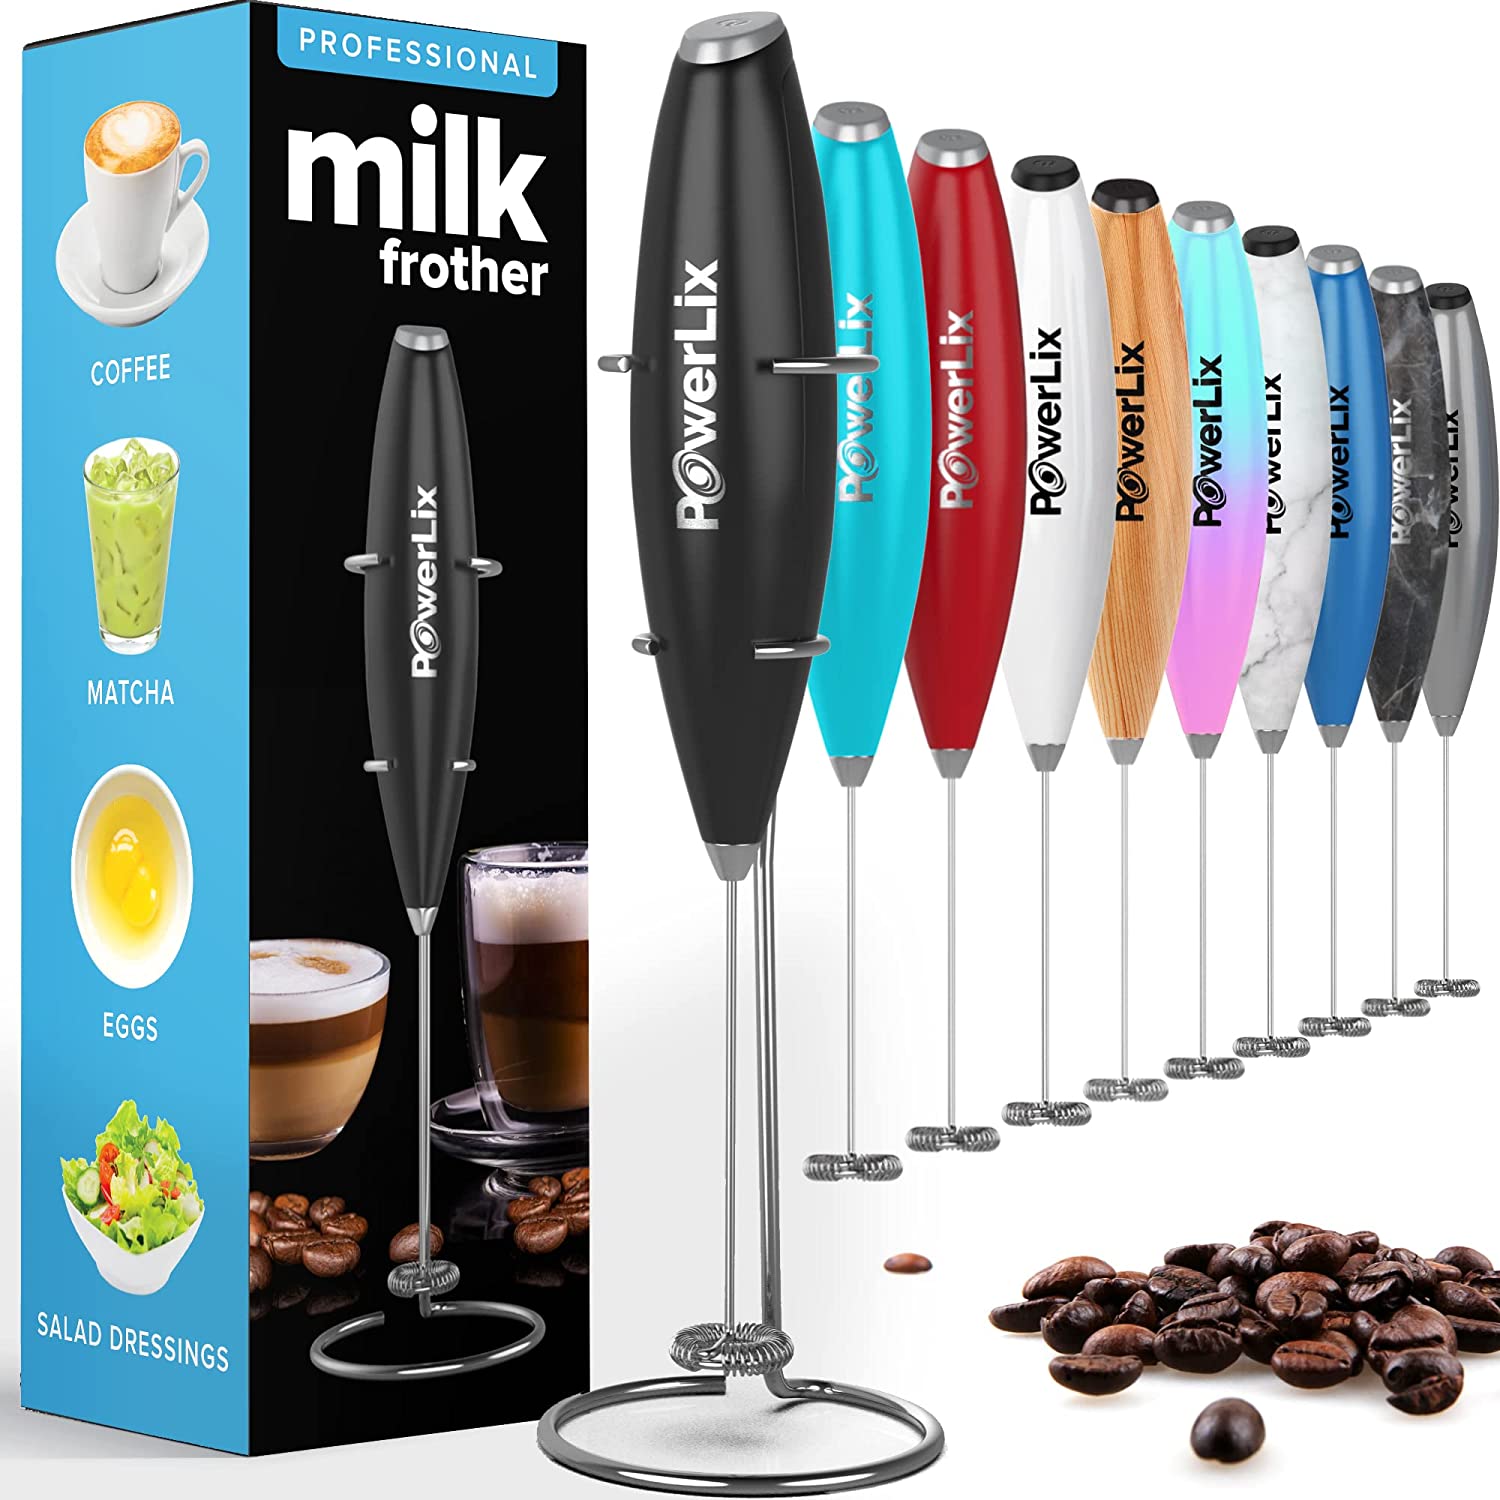 WakeMeUp Wireless Rechargeable USB Powered Handheld Milk Frother 3 Whisks included 